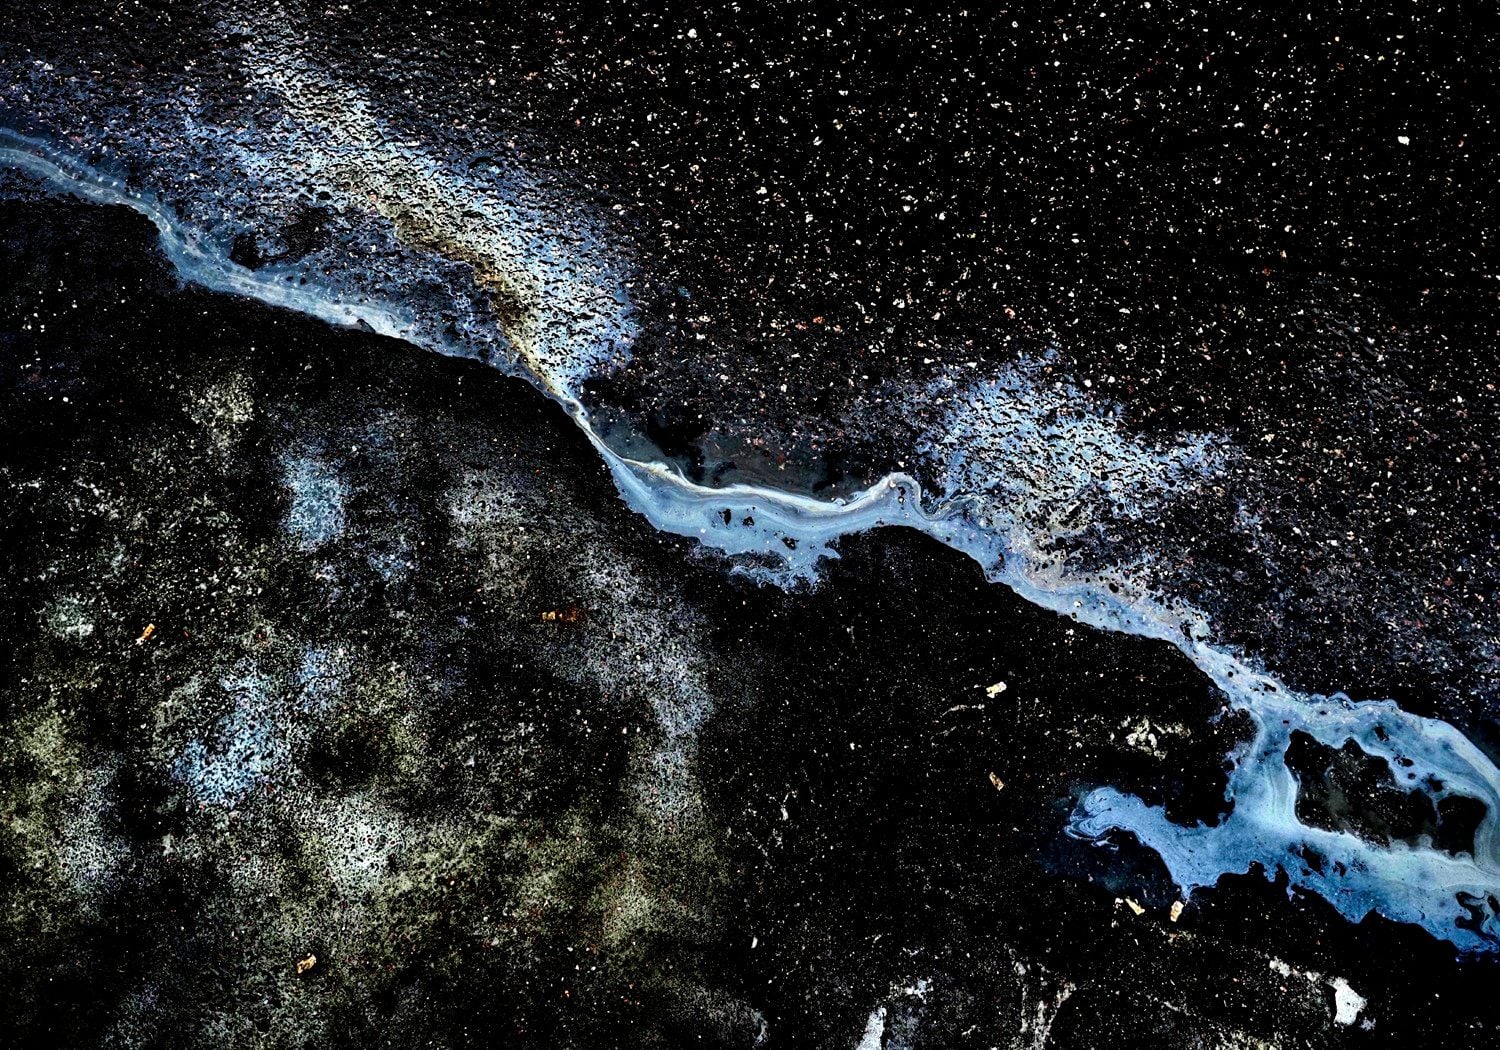 Close-up oil spill photo resembles stars and galaxies in space, as featured in photographer Juha Tanhua's ongoing 